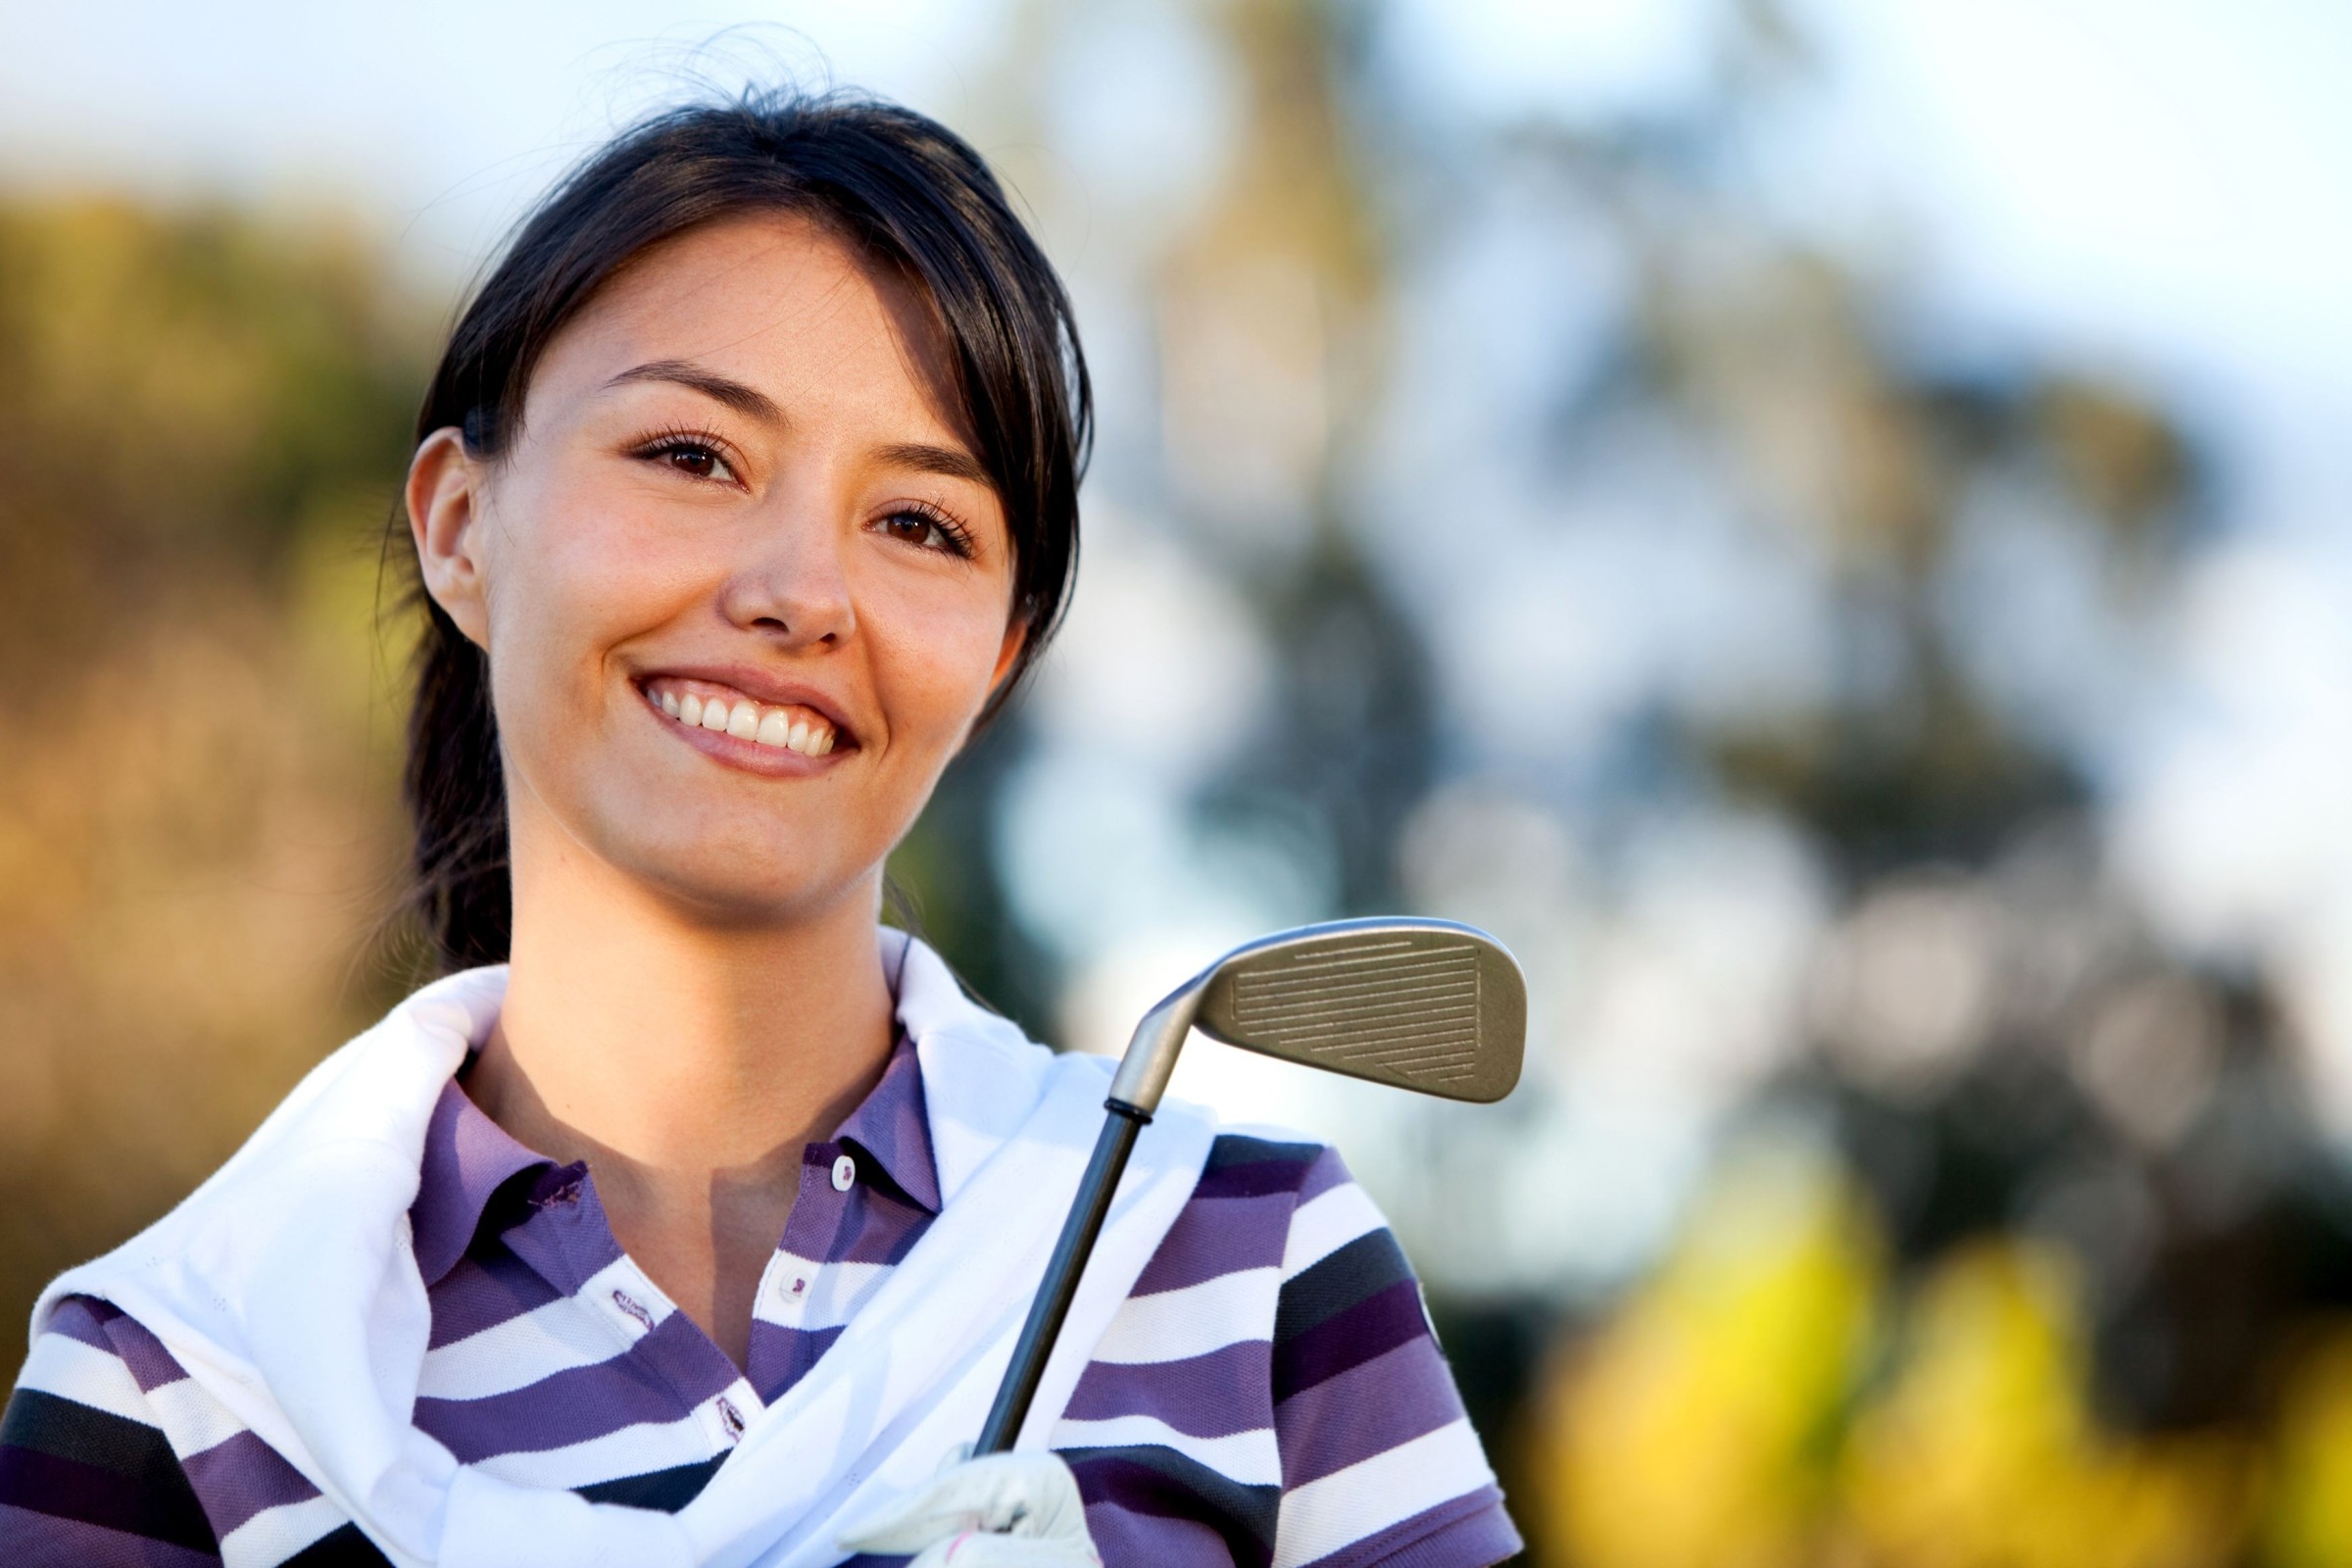 HOW TO MANAGE YOUR GOLFING EMOTIONS